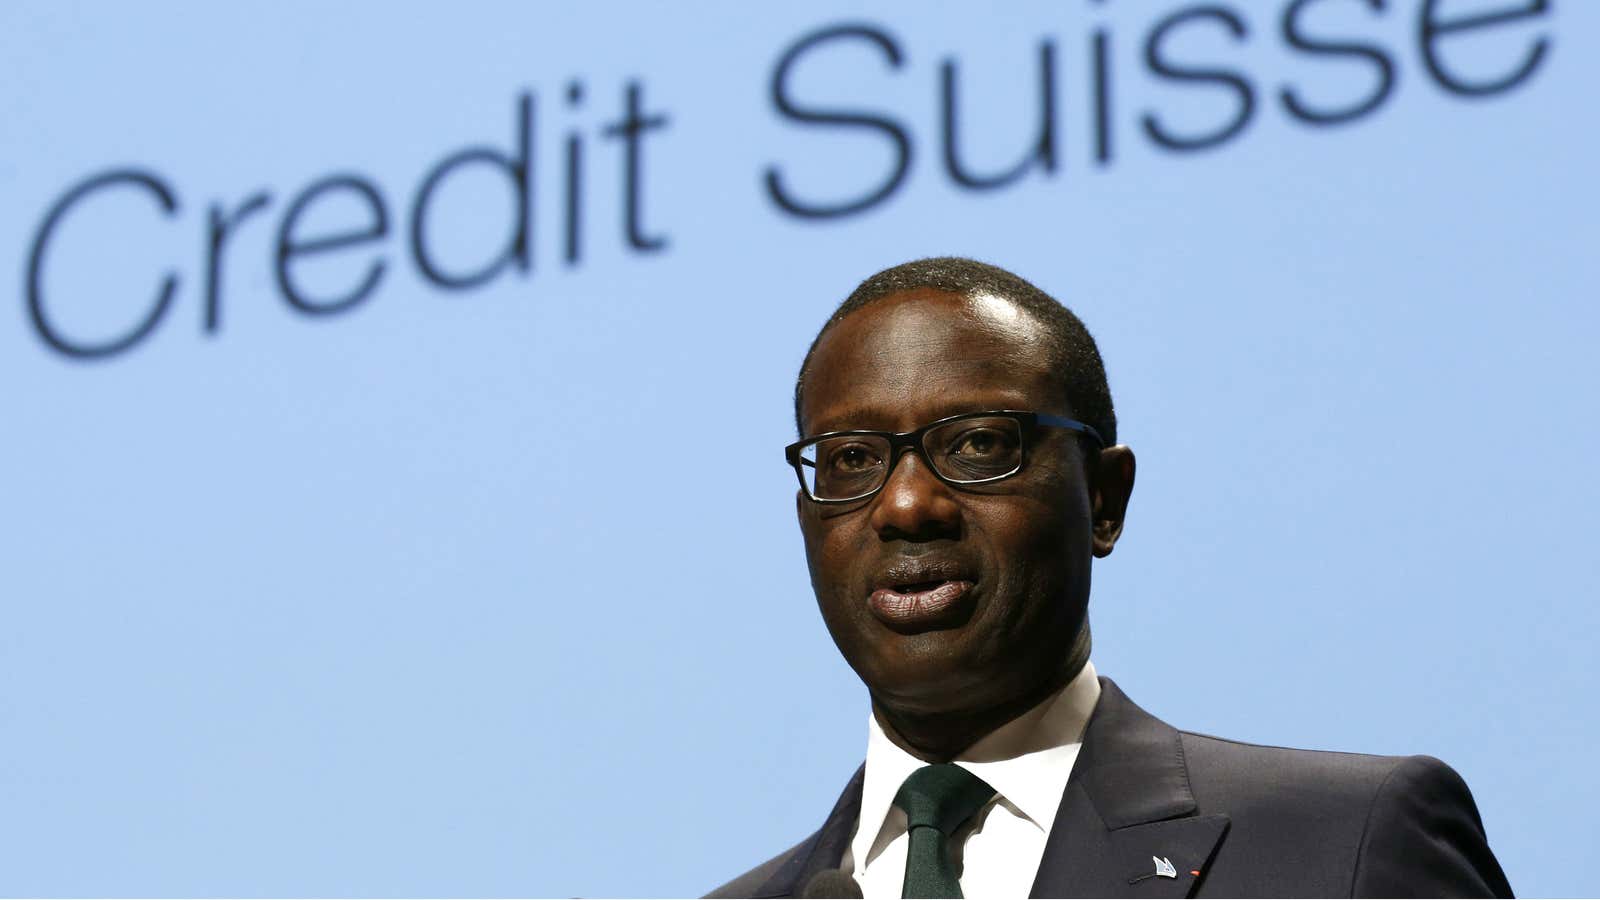 CEO Tidjane Thiam is pushing for “incremental annual productivity gains.”